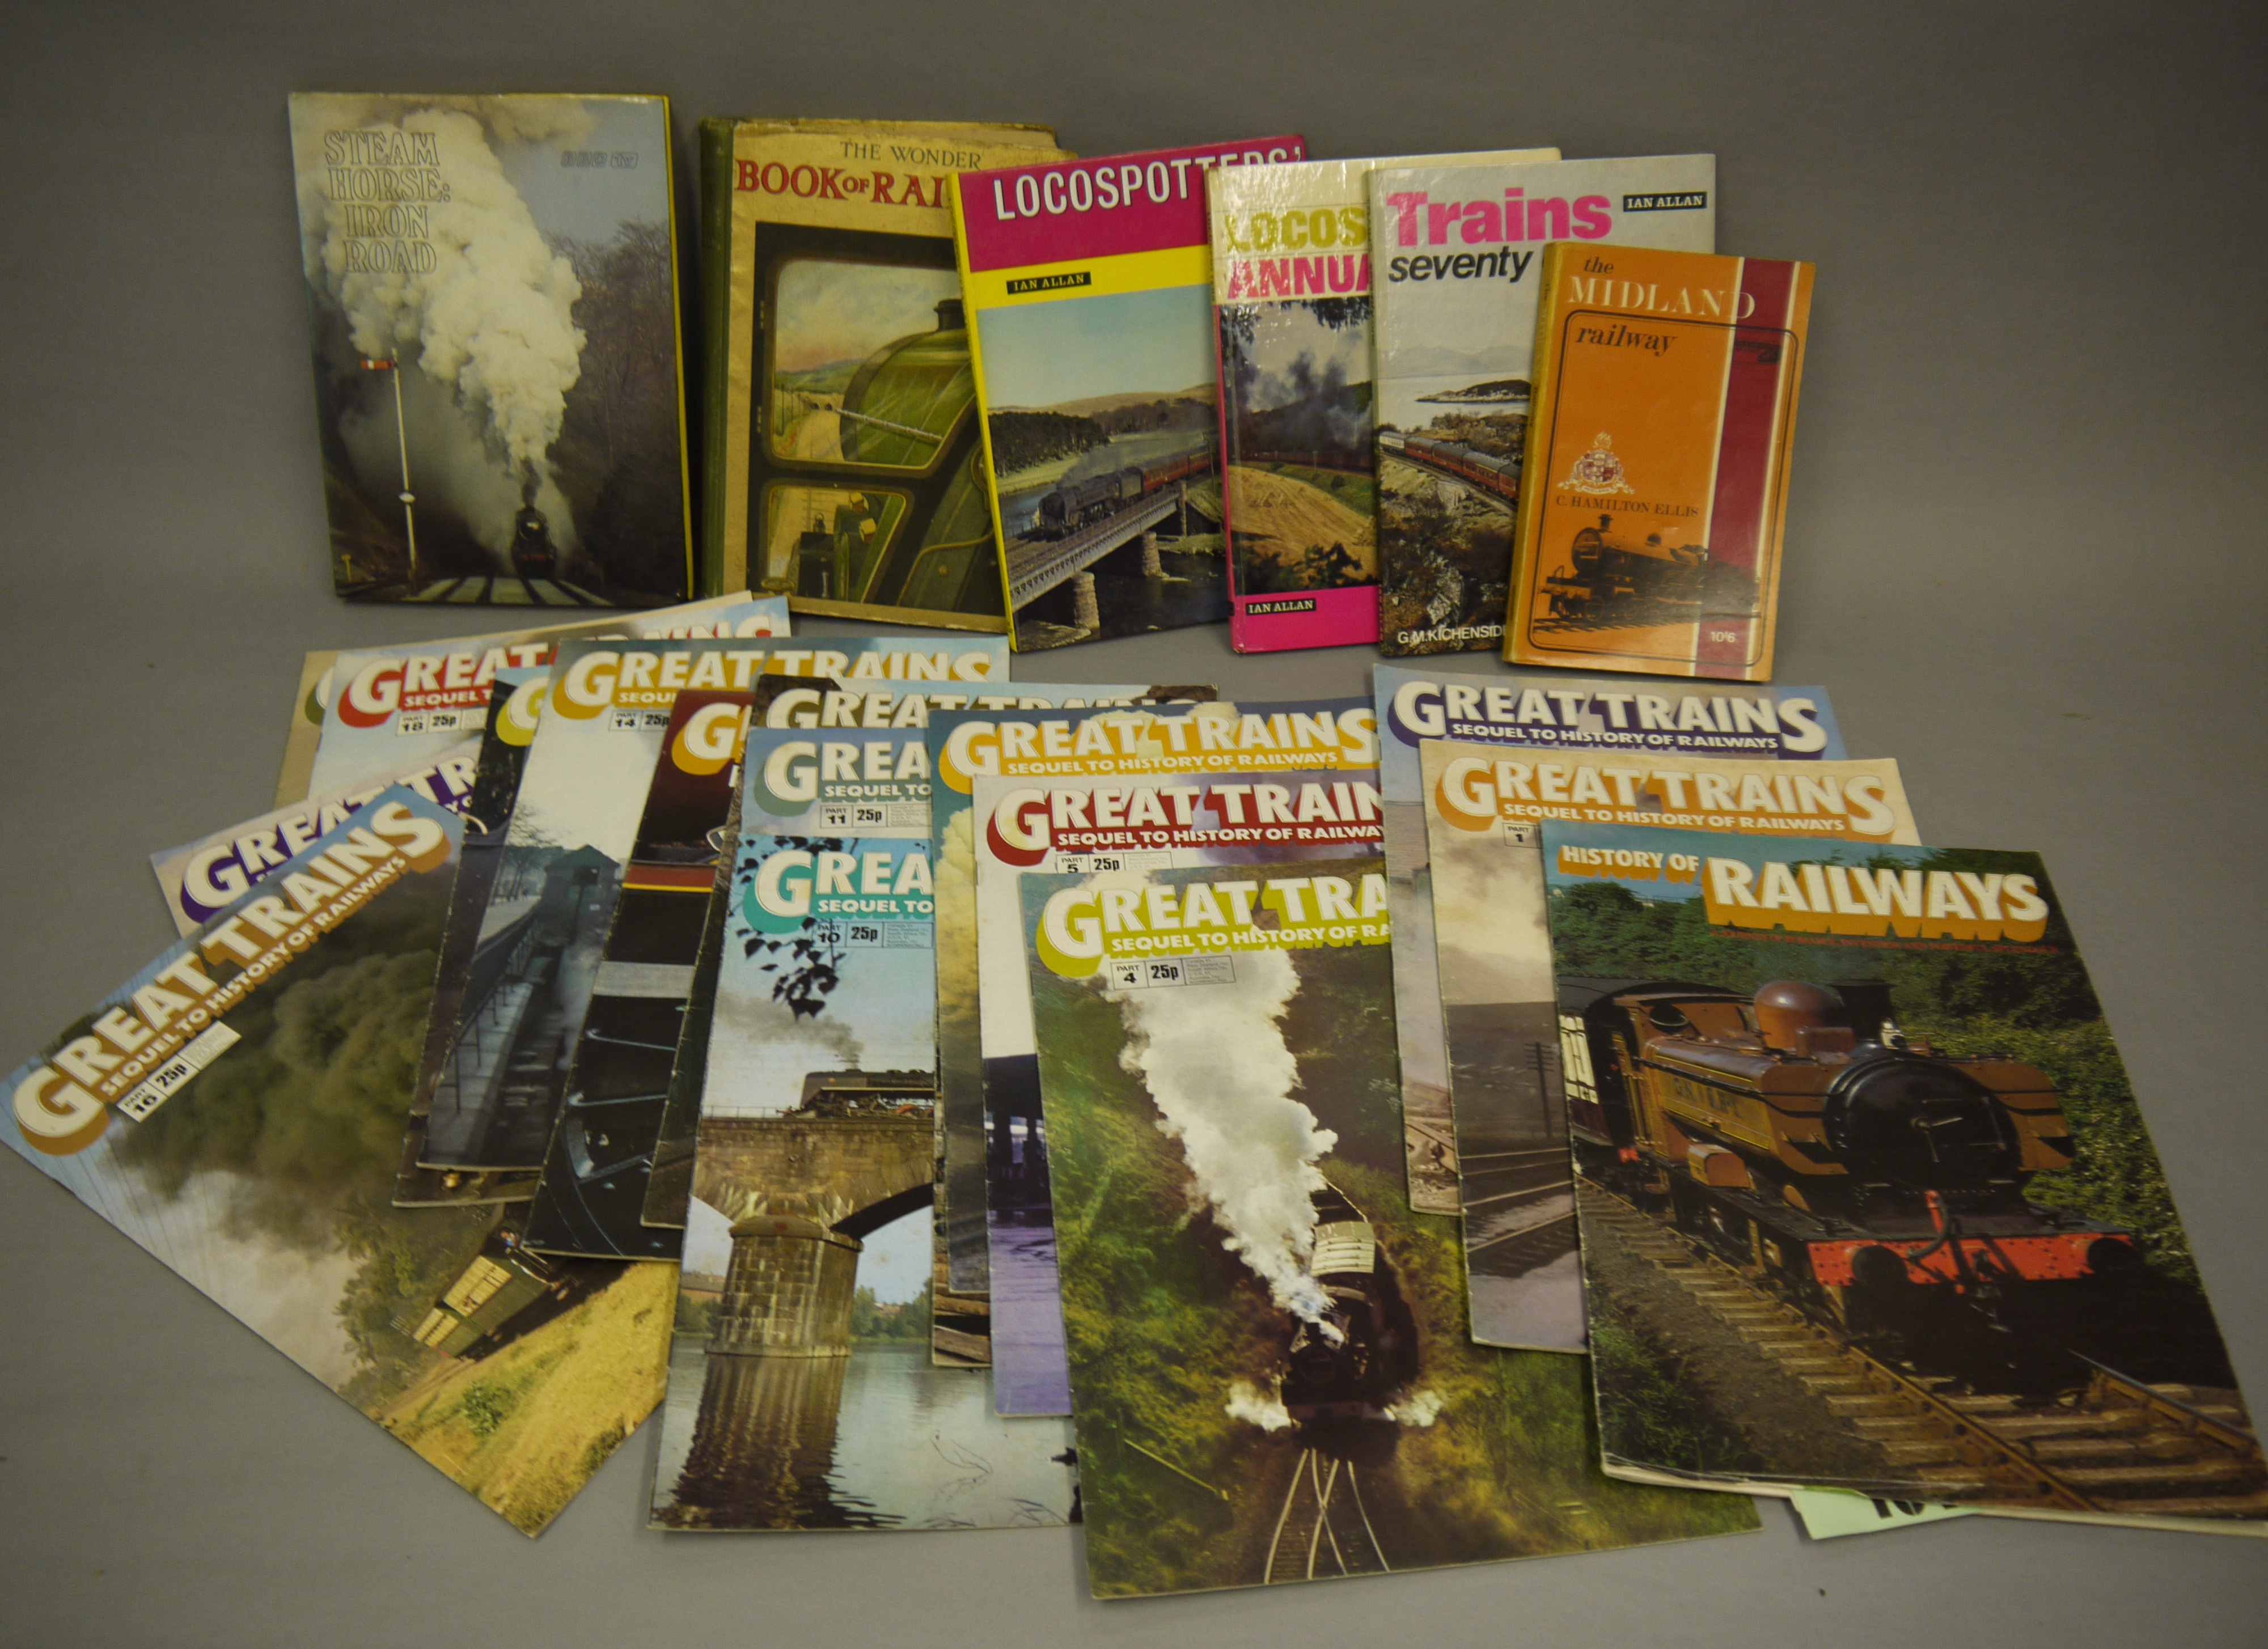 A quantity of railway books and Great Trains magazines (2 boxes)